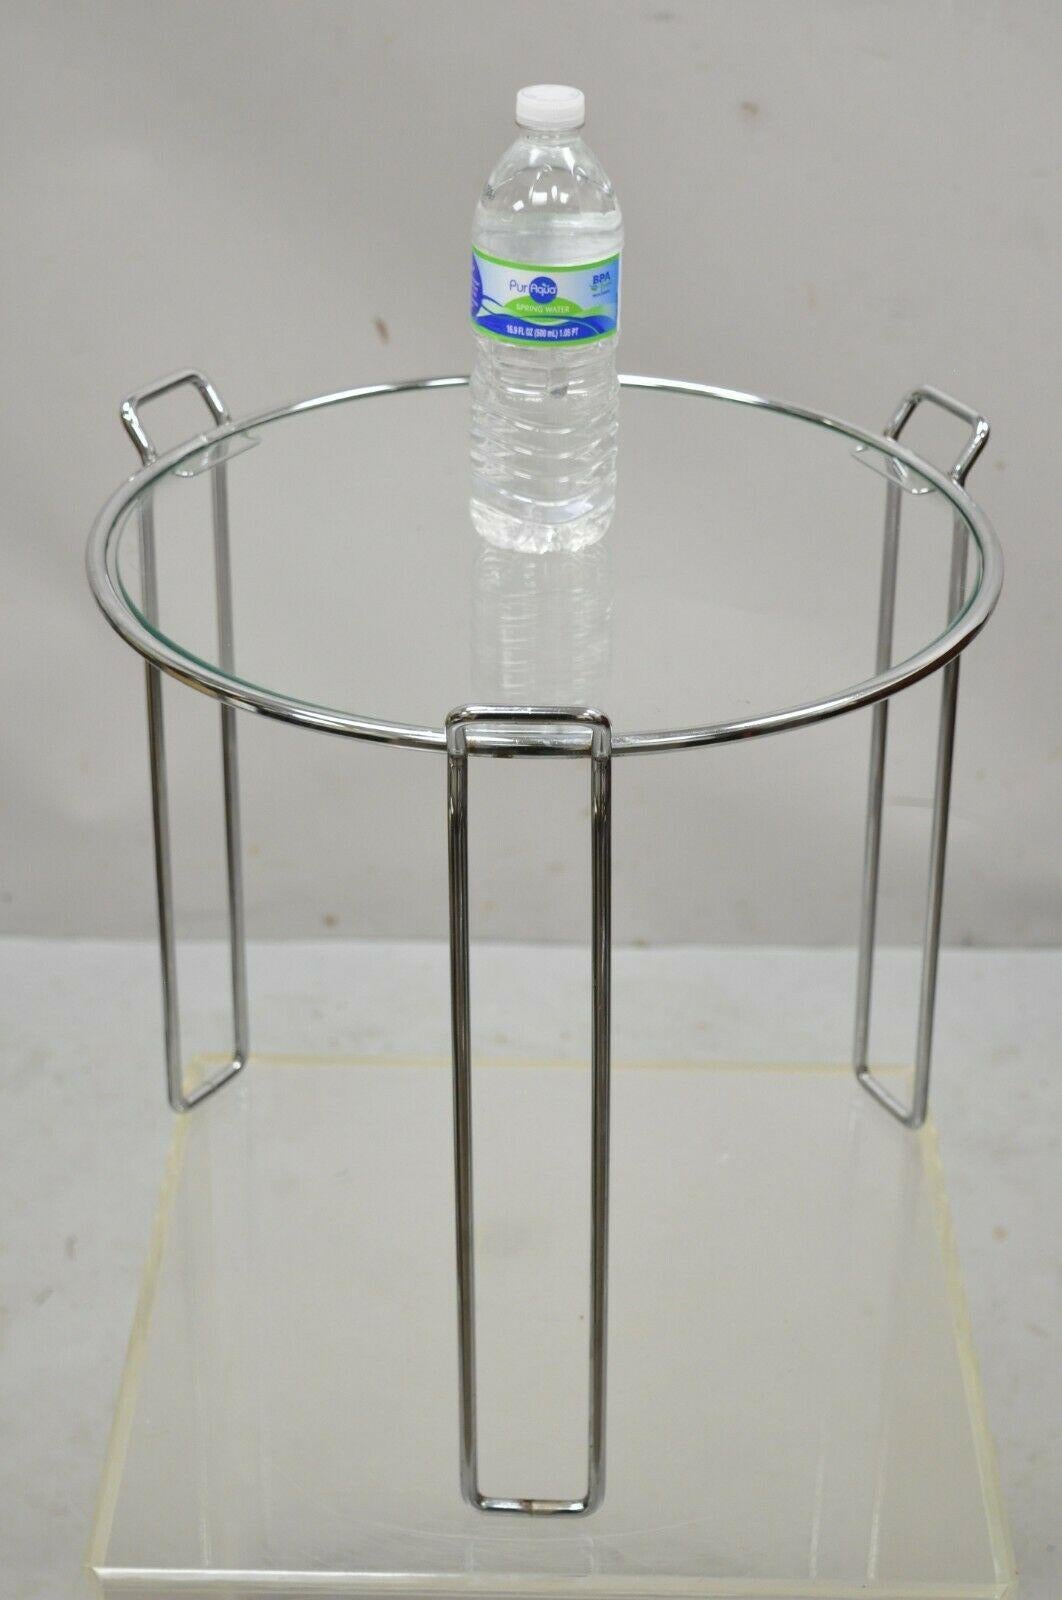 Vintage Mid-Century Modern round modernist chrome frame glass side table. Item features chrome sleek frame, round glass top, very nice vintage item, clean modernist lines. Circa mid to late 20th century. Measurements: 16